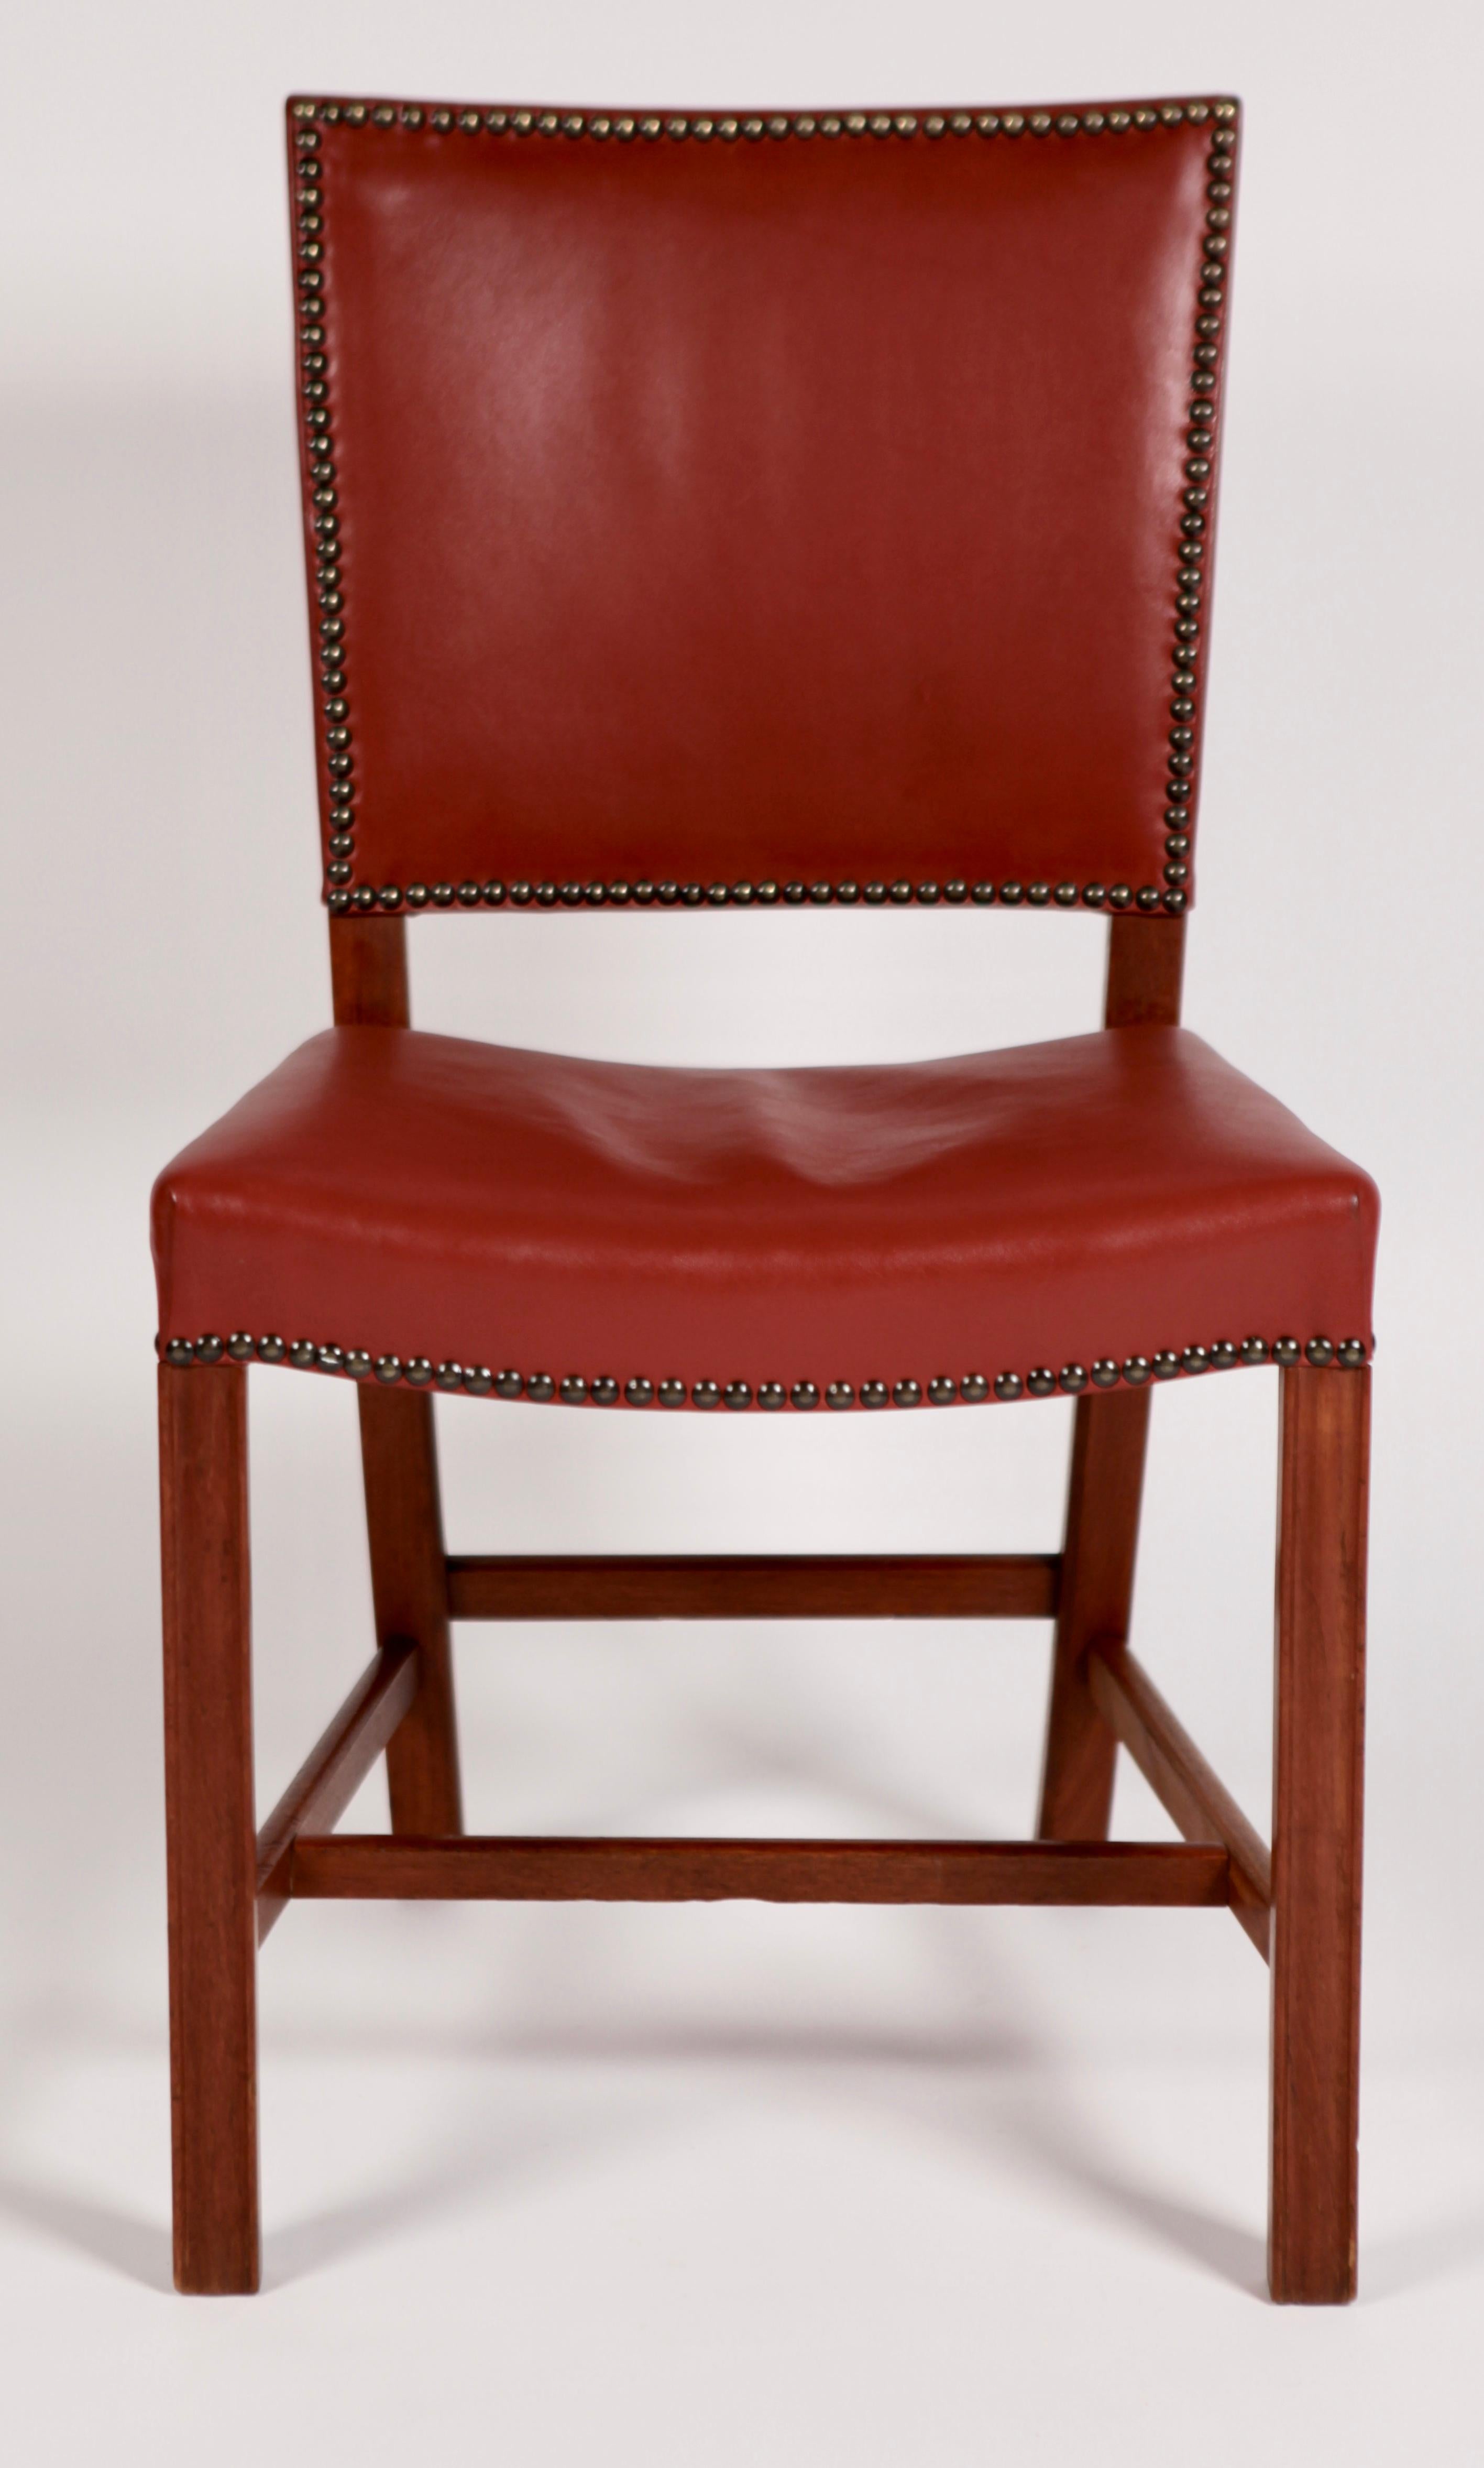 Kaare Klint, Barcelona Chair, Red Leather and Mahogany, Denmark, 1940s 3